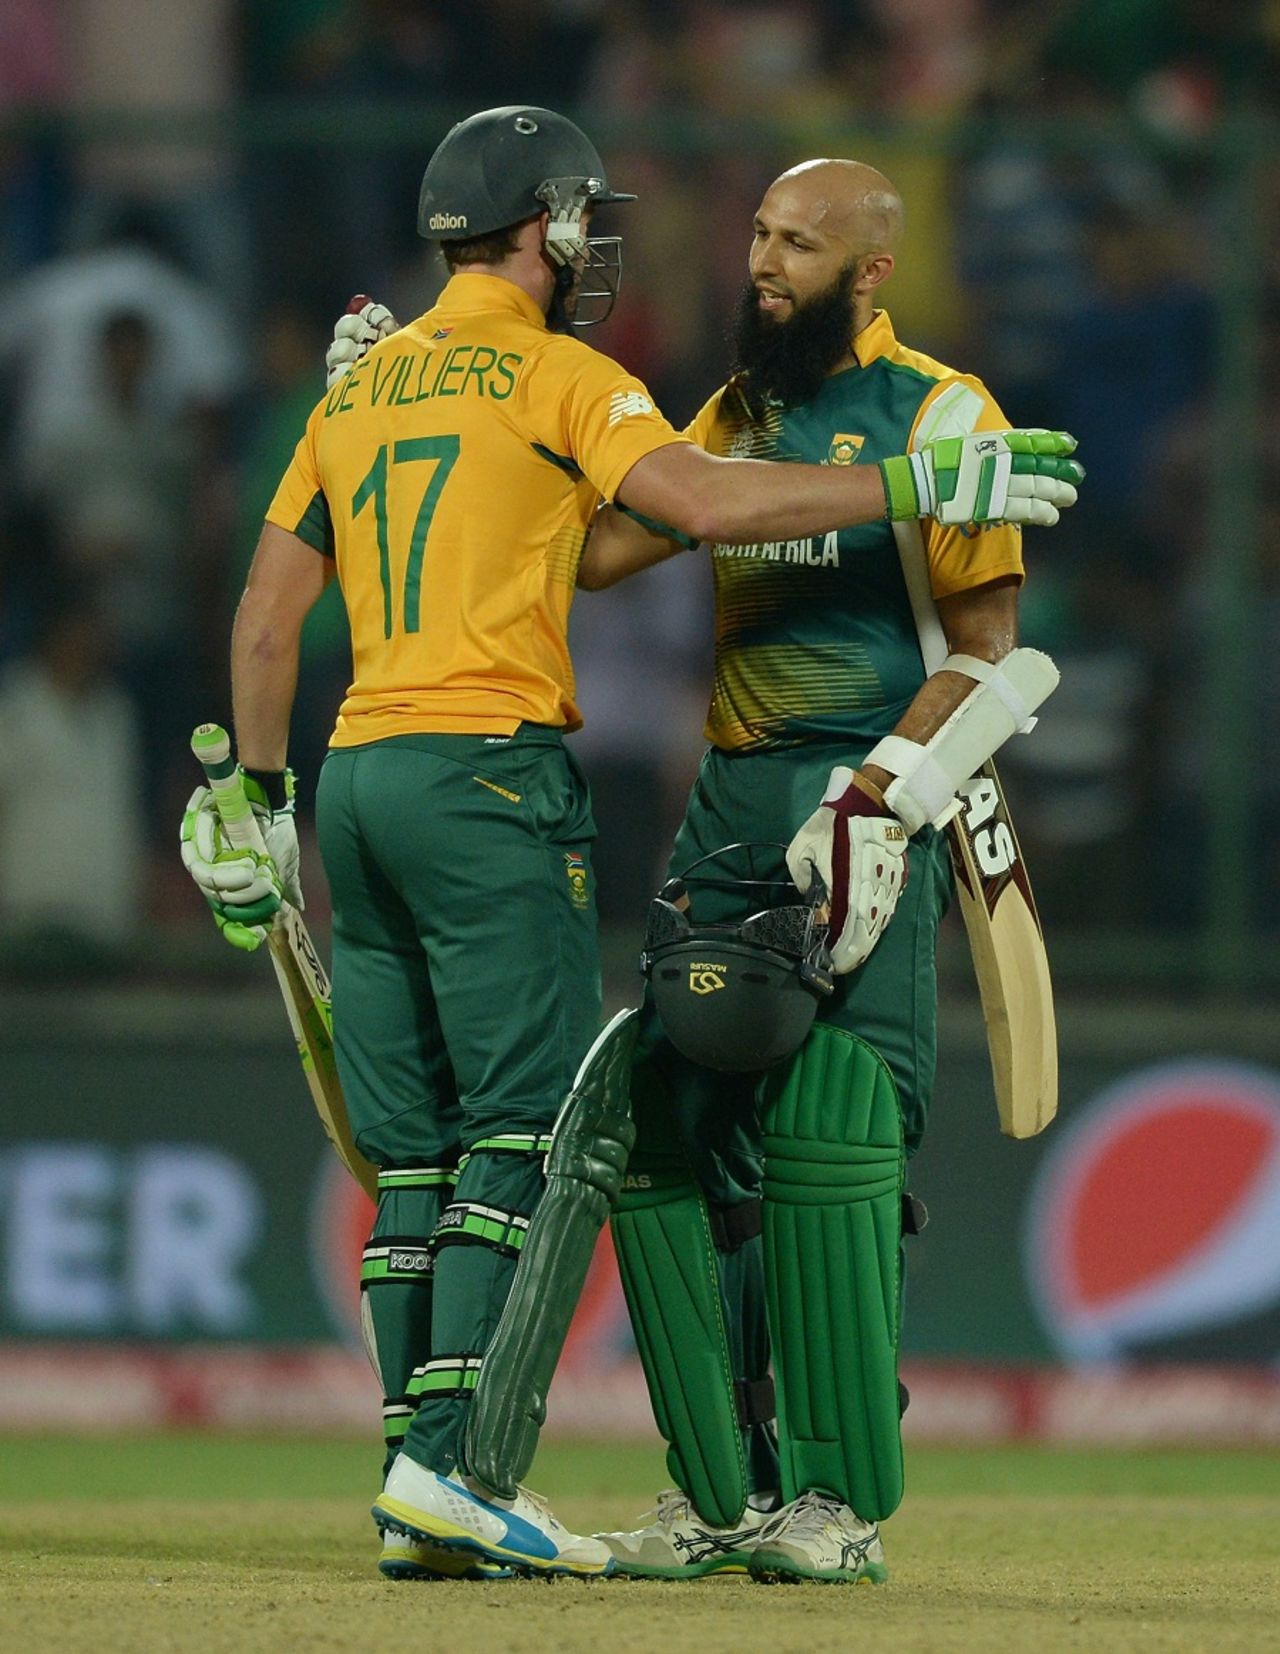 AB de Villiers and Hashim Amla hug each other after taking South Africa home, South Africa v Sri Lanka, World T20 2016, Group 1, Delhi, March 28, 2016